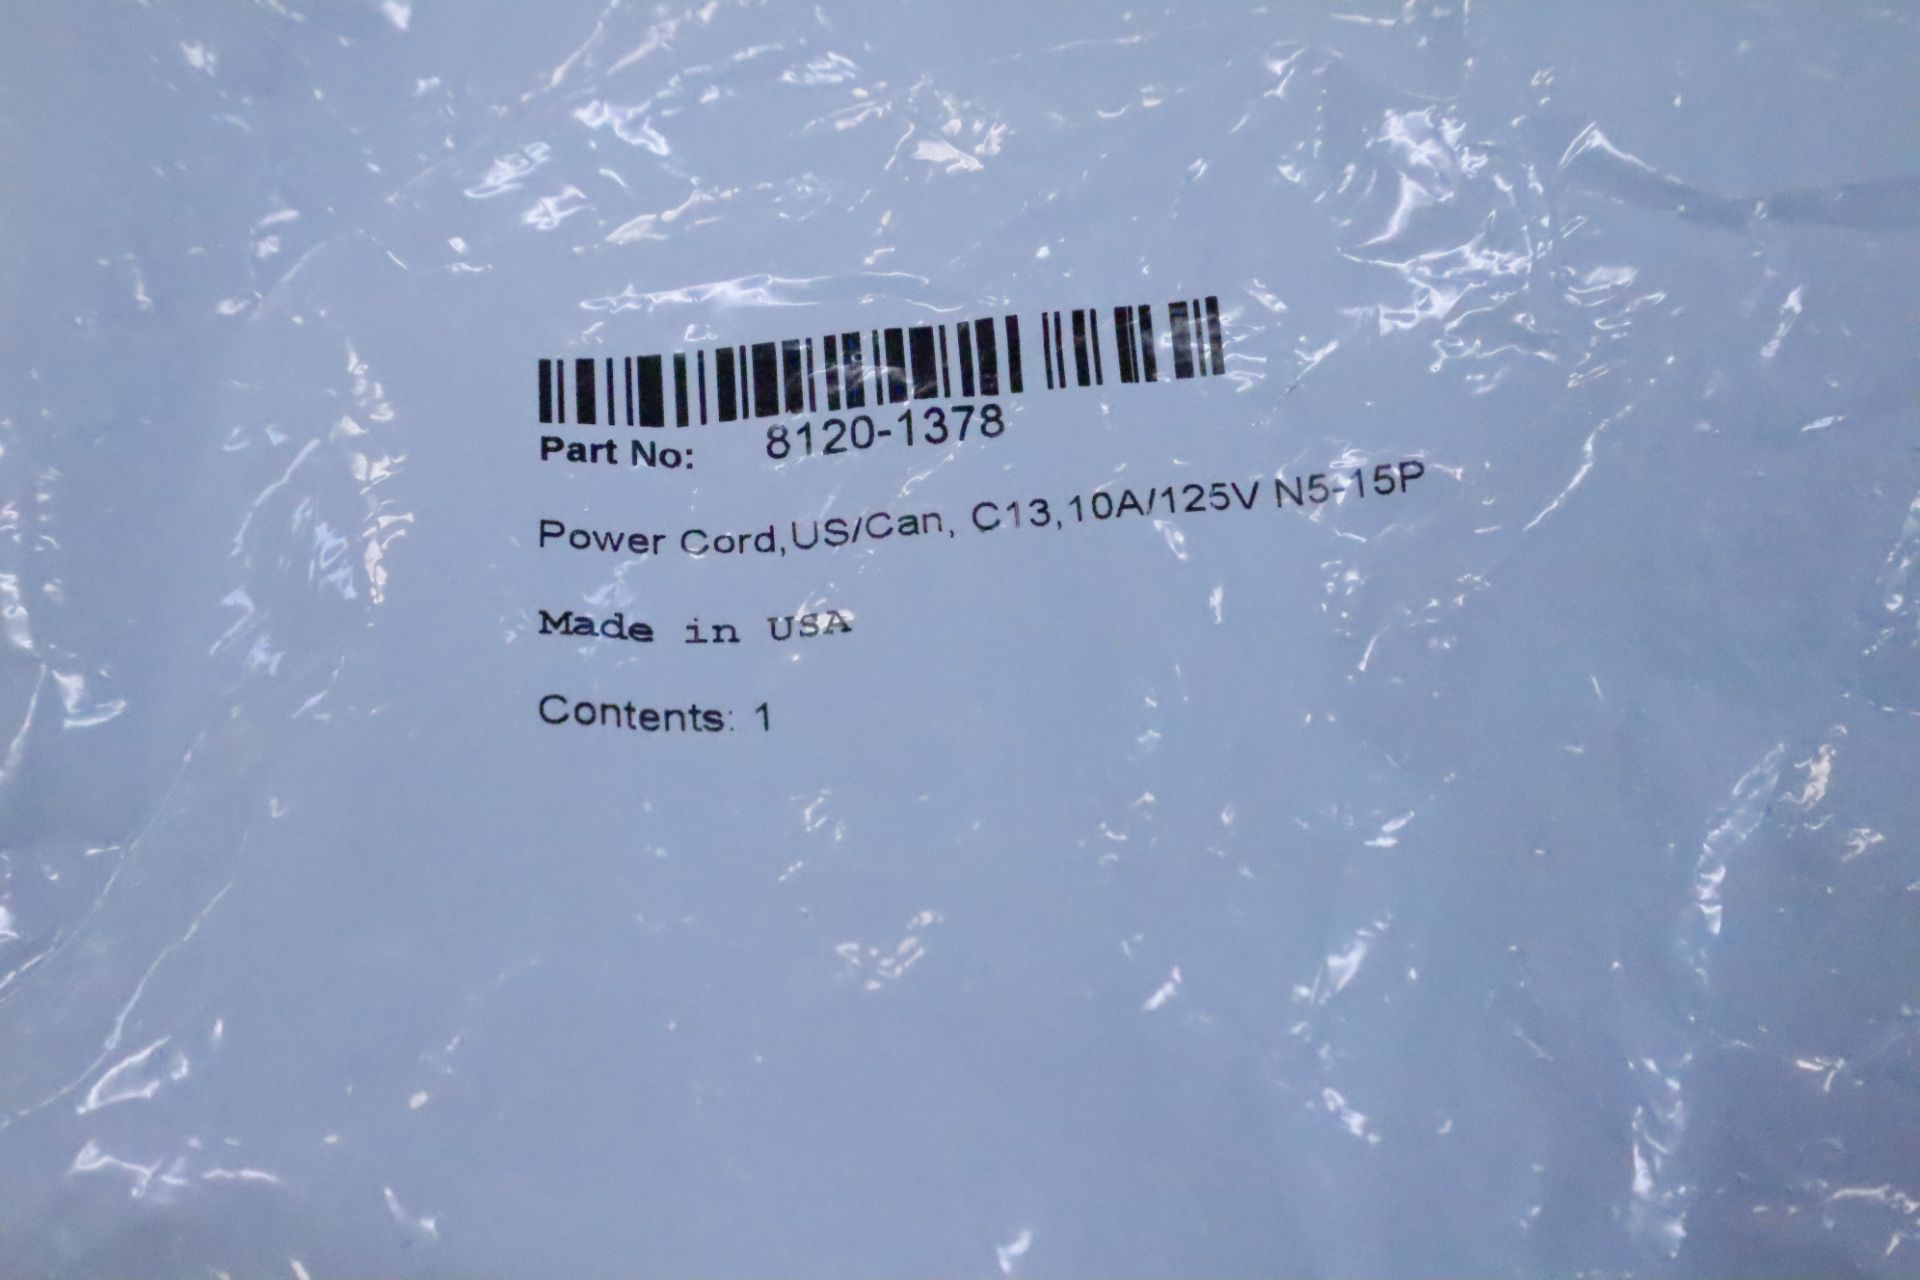 UPDATED PHOTOS Agilent Technologies OEM Replacement Parts and tool kits for LC/MS Machines - Image 11 of 37